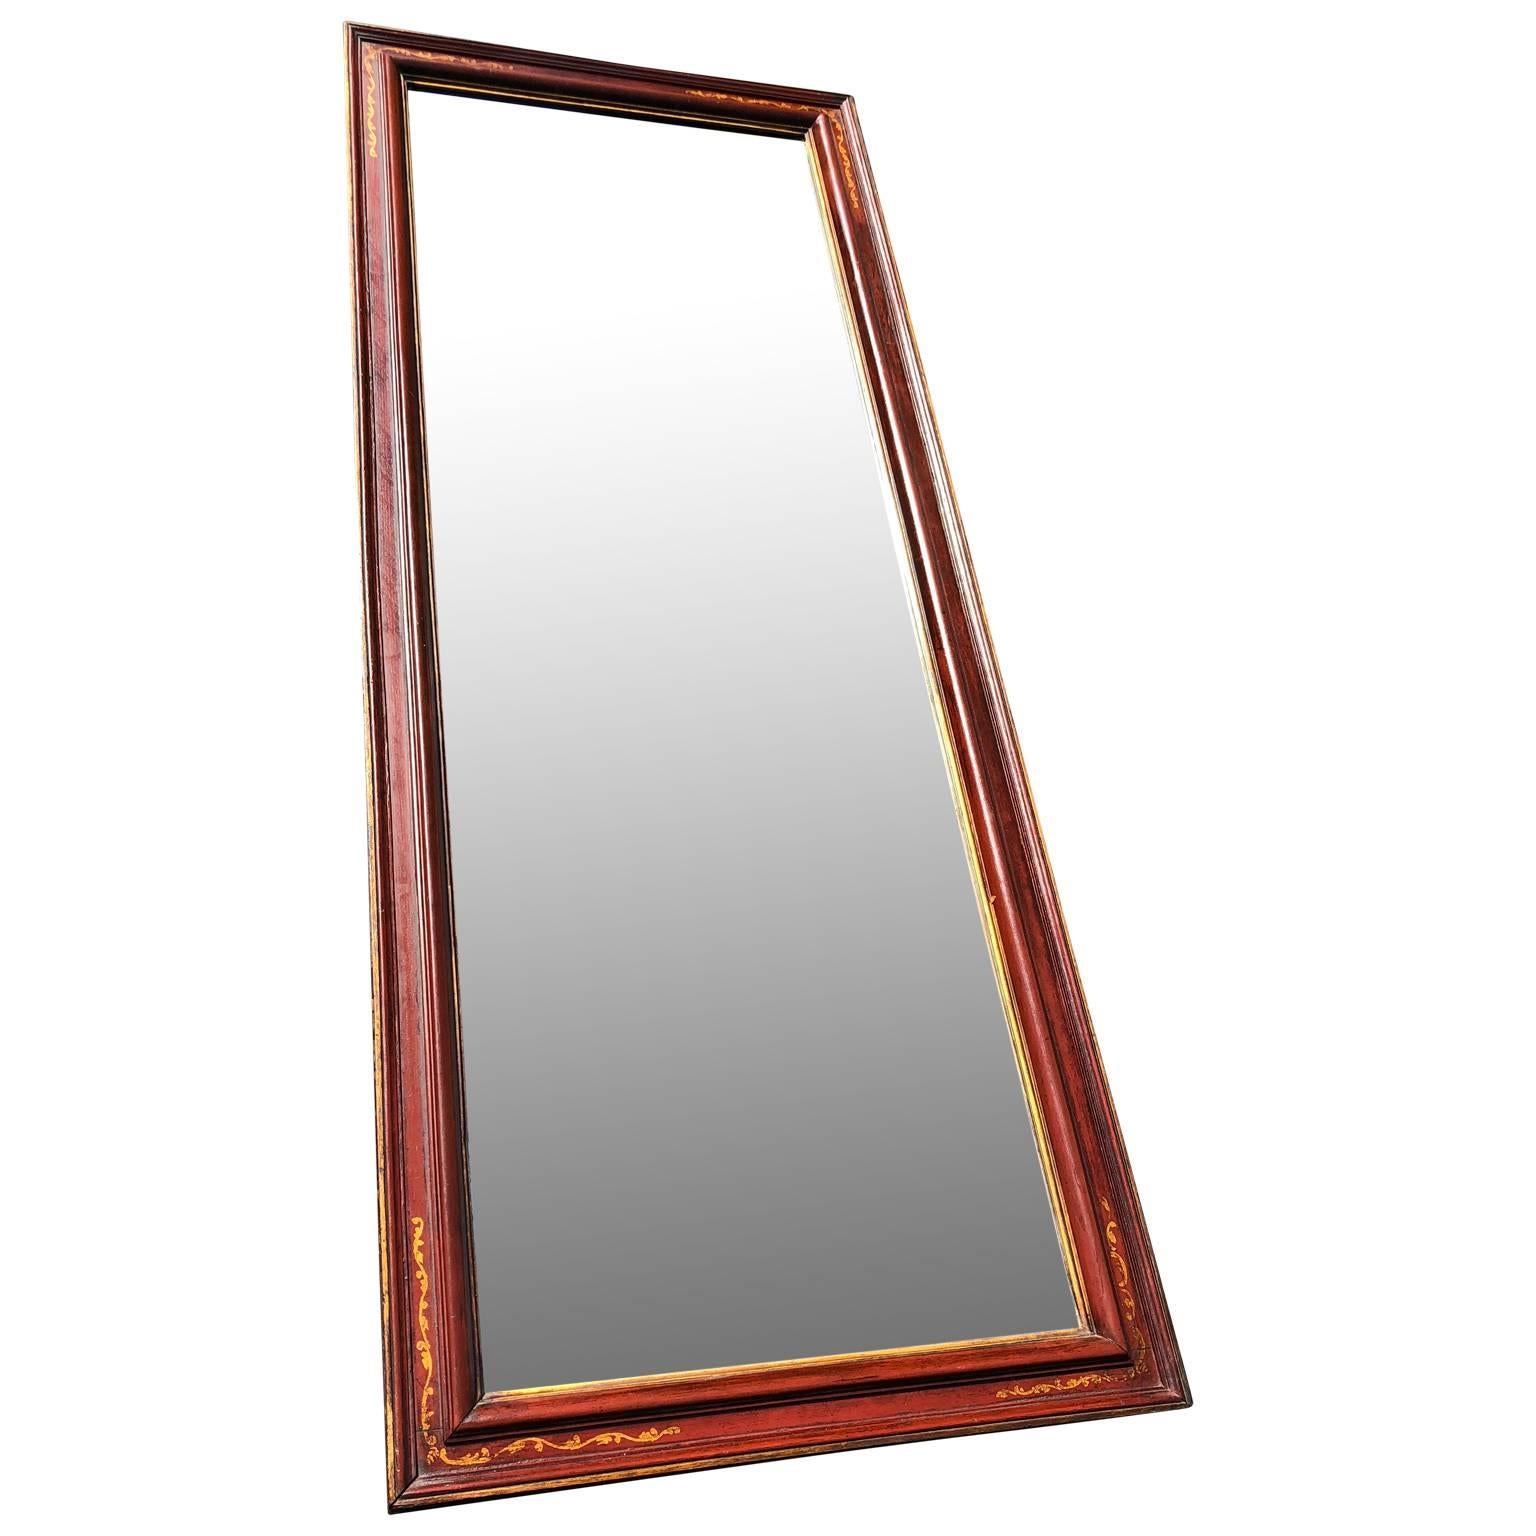 Large antique floor mirror with bevelled mirror glass
Mirror could also be used as a large horizontal wall mirror.

